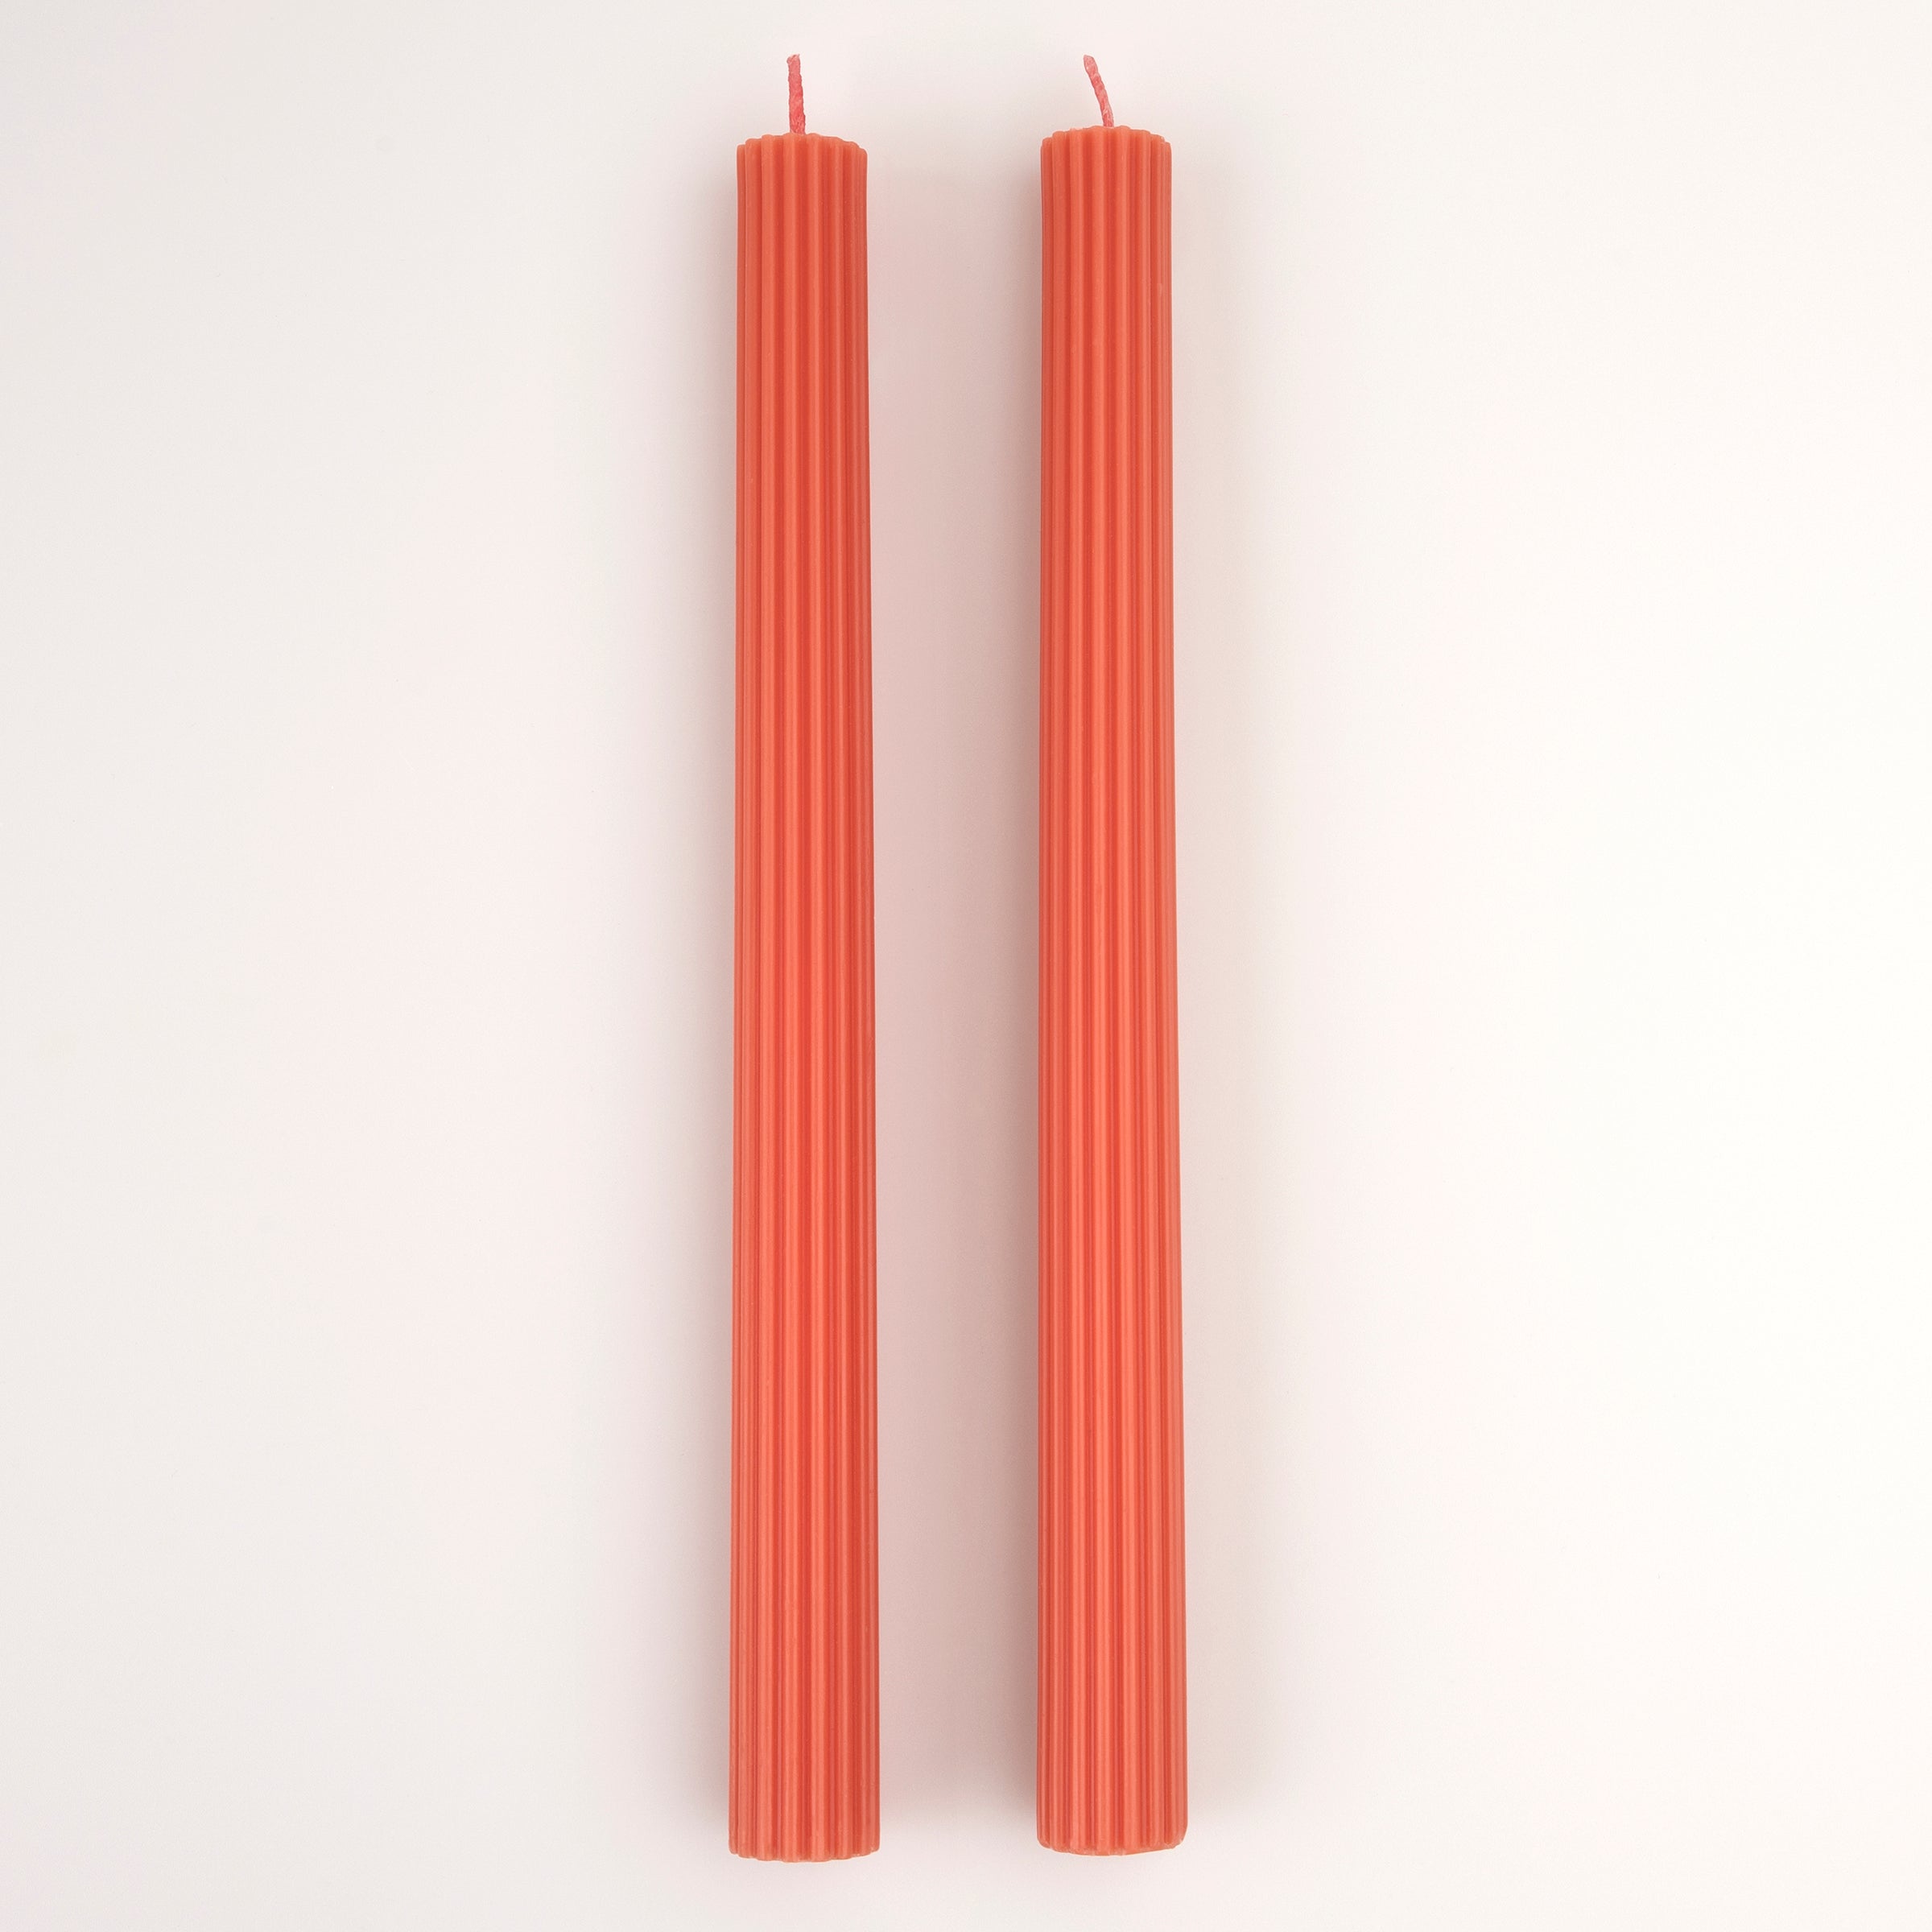 Our tall candles, in coral, are wonderful as a hostess gift or table decoration.